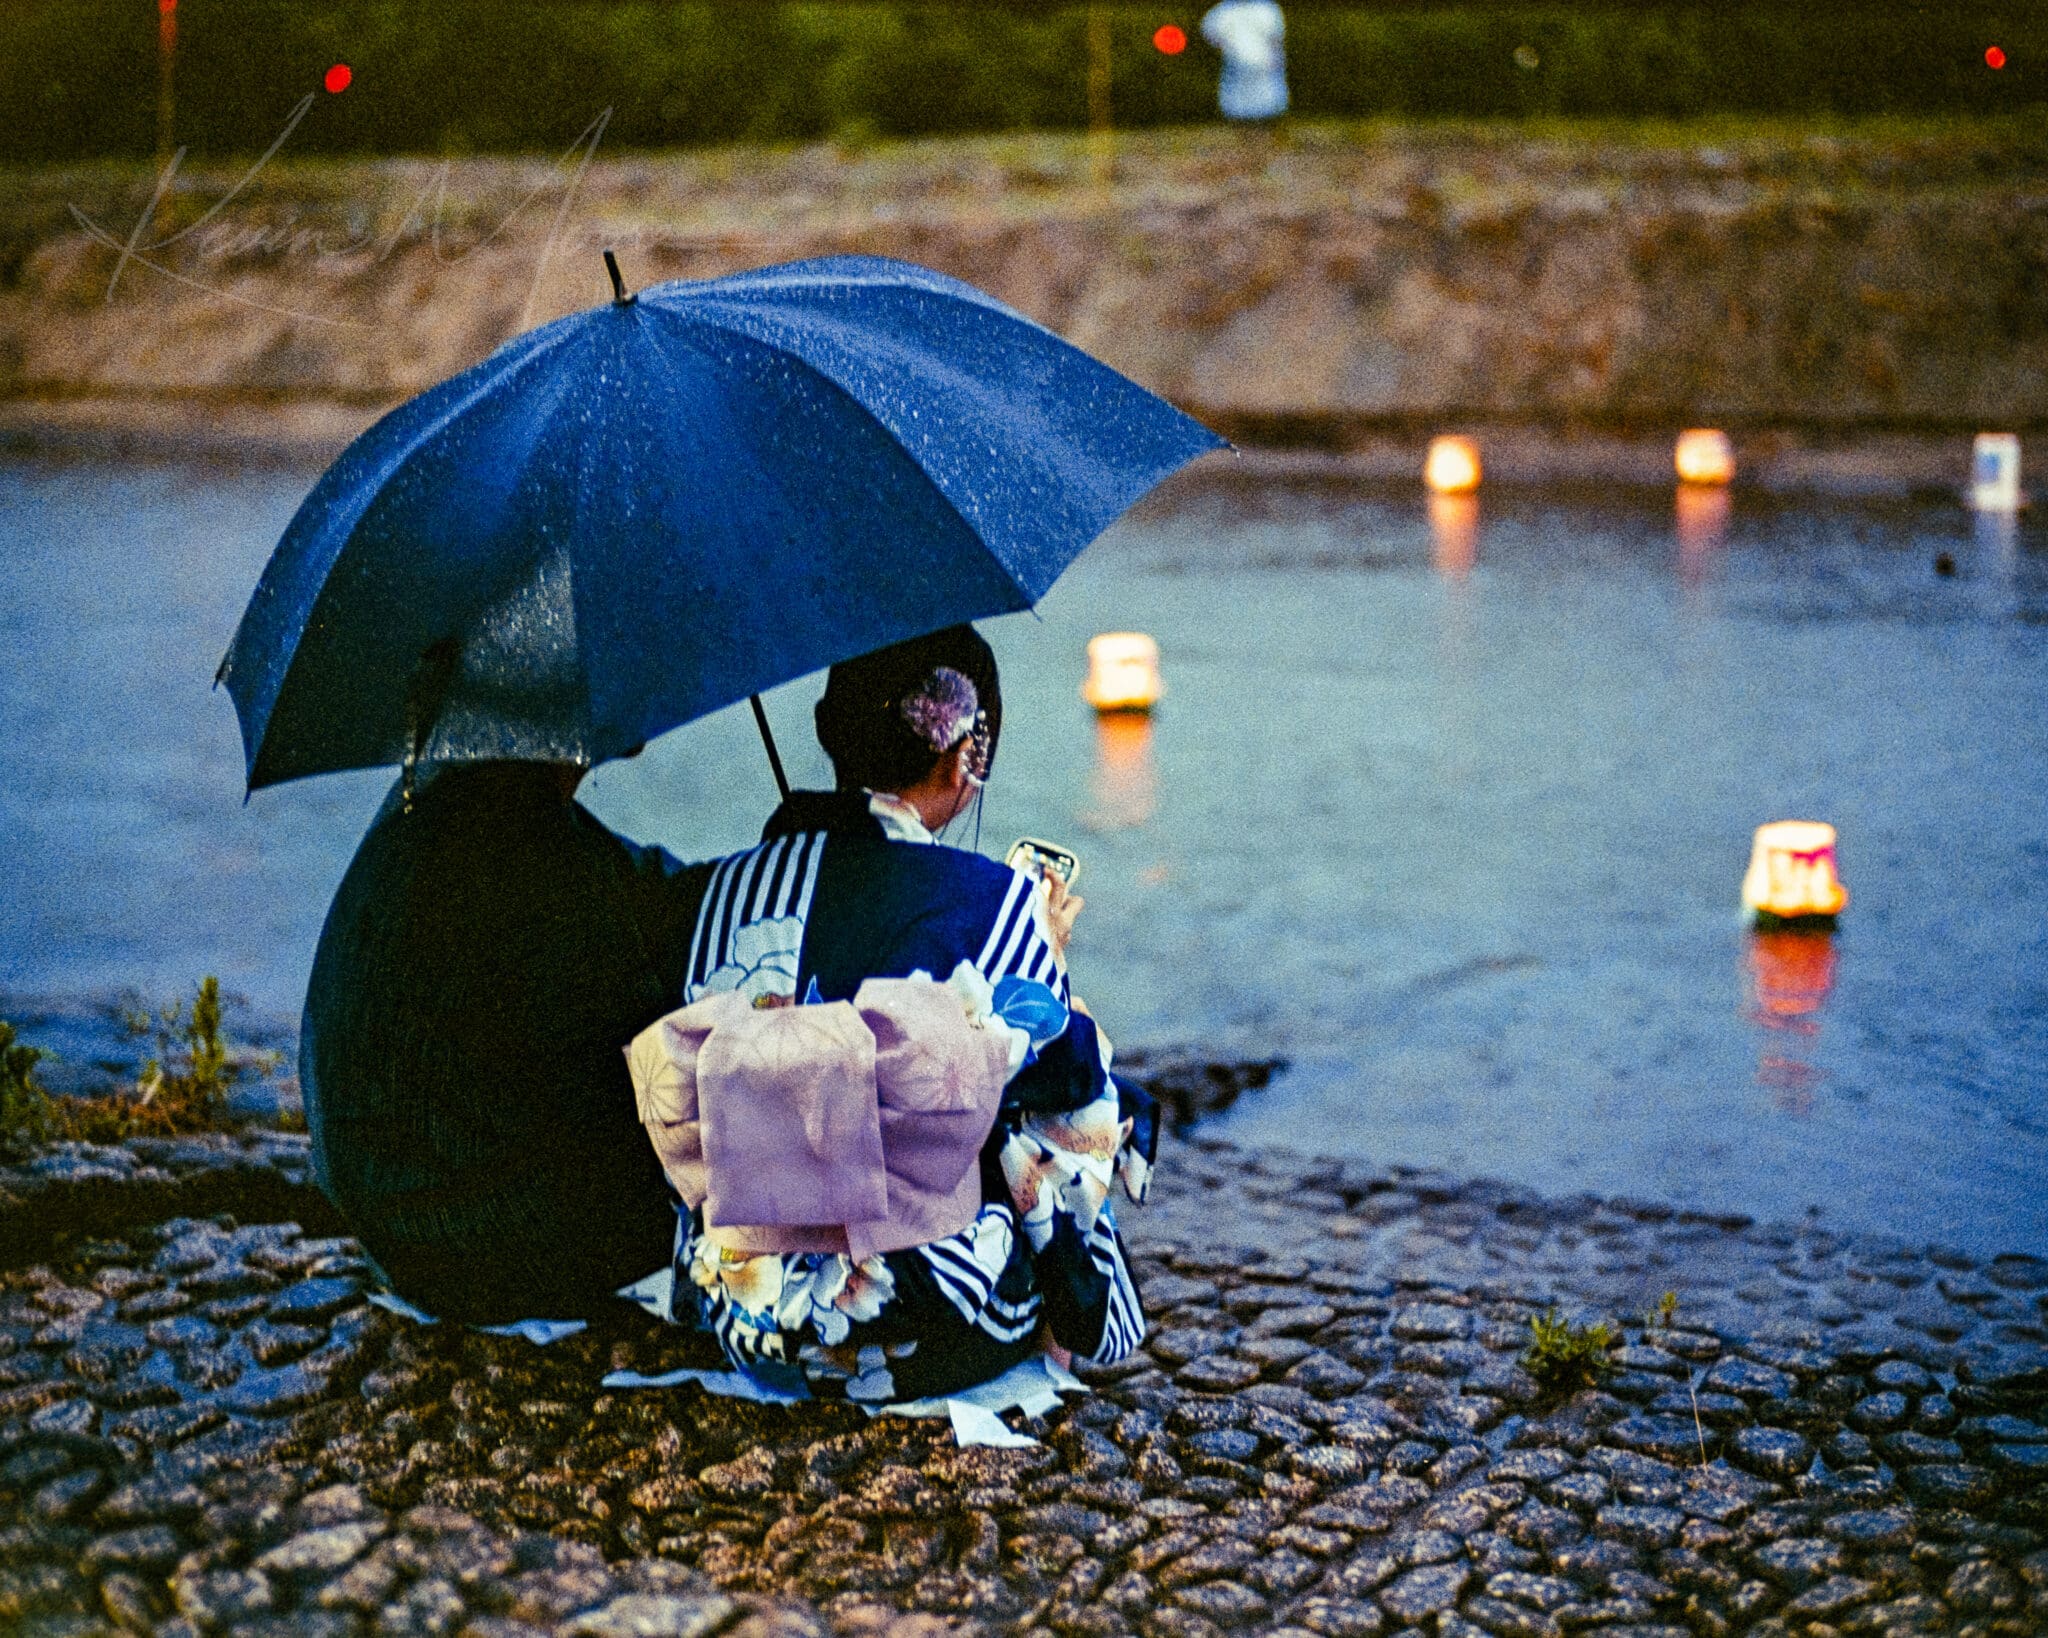 A couple in traditional Japanese attire sitting by a river with floating lanterns at twilight.